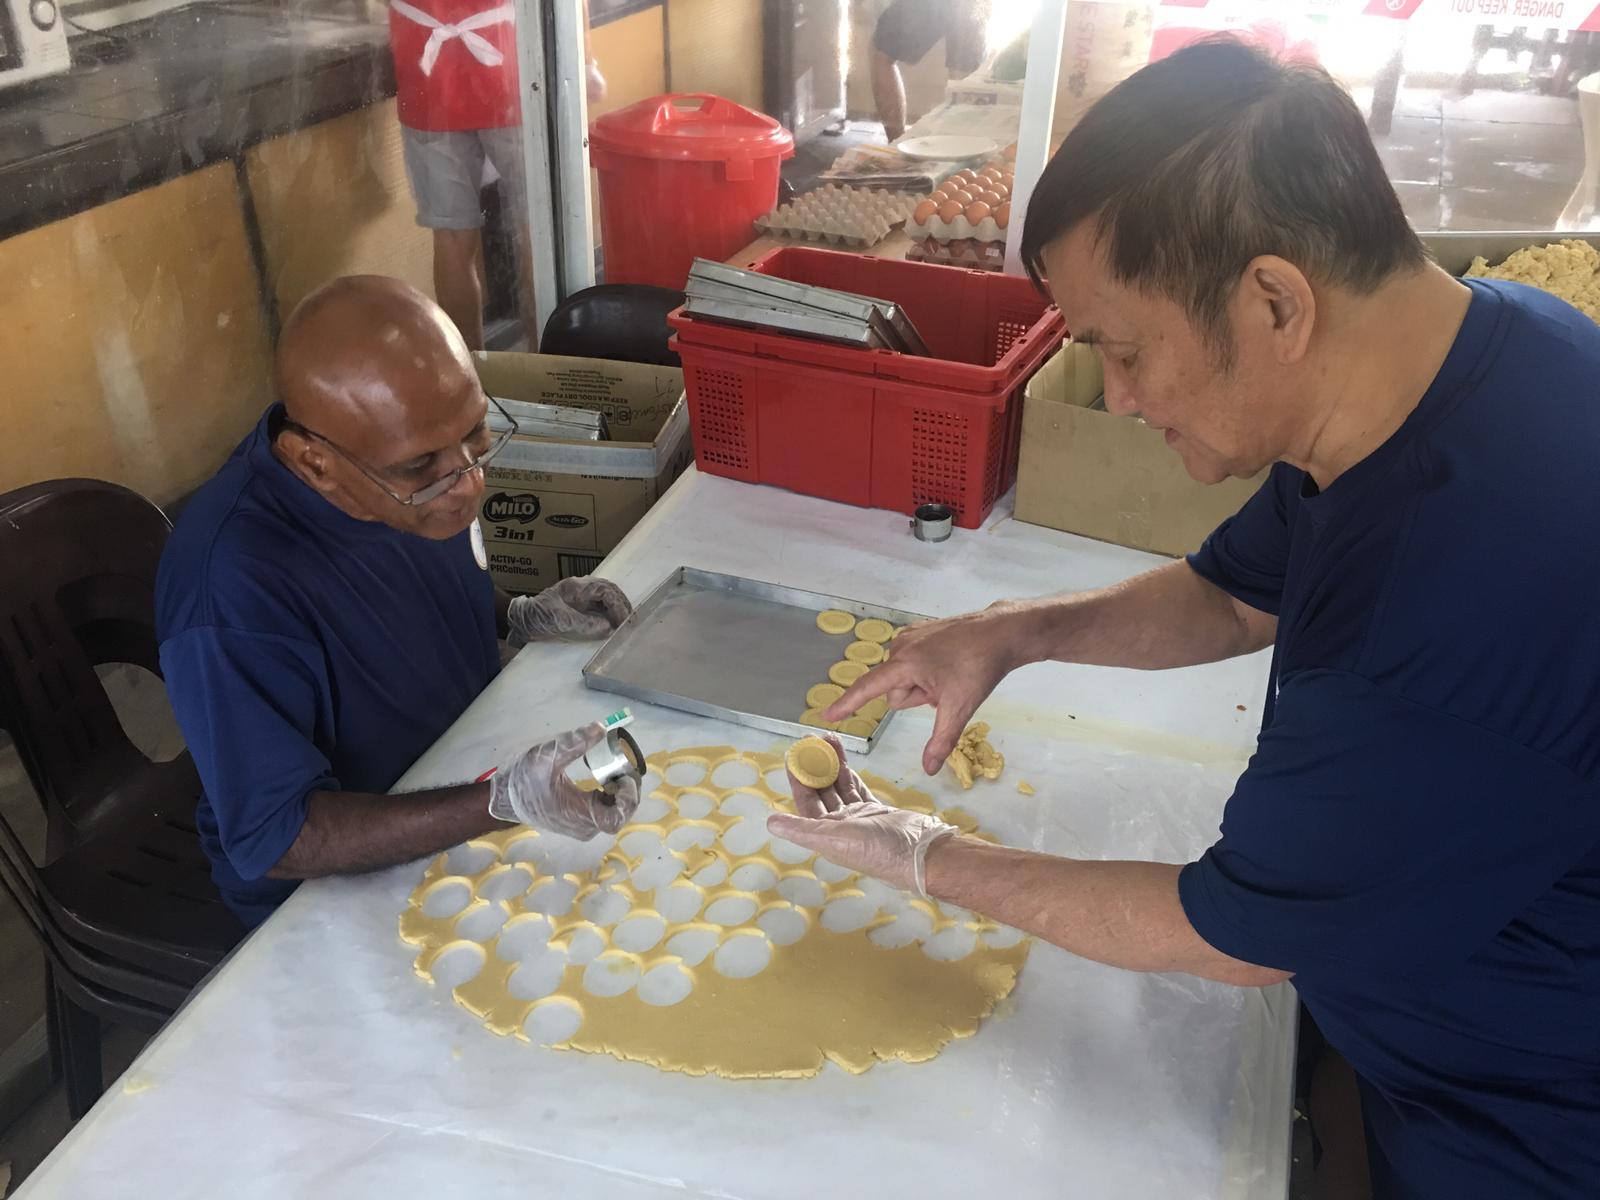 Pastor Philip Chan (right) showing a resident what to look out for when cutting the pastry. Photo courtesy of Sart S.